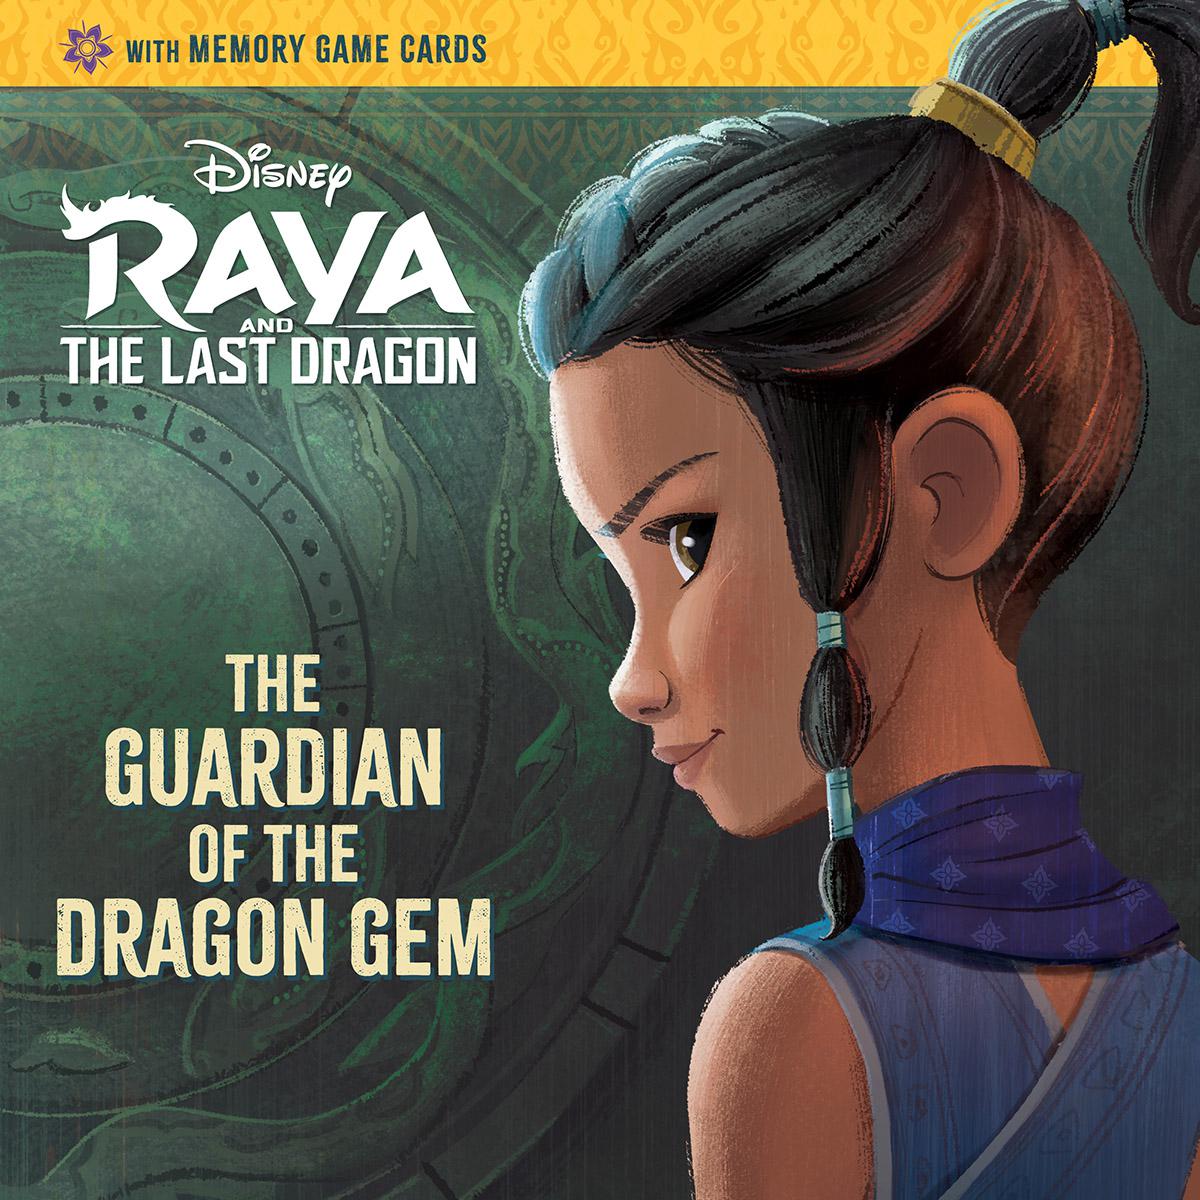  Raya and the Last Dragon: The Guardian of the Dragon Gem 